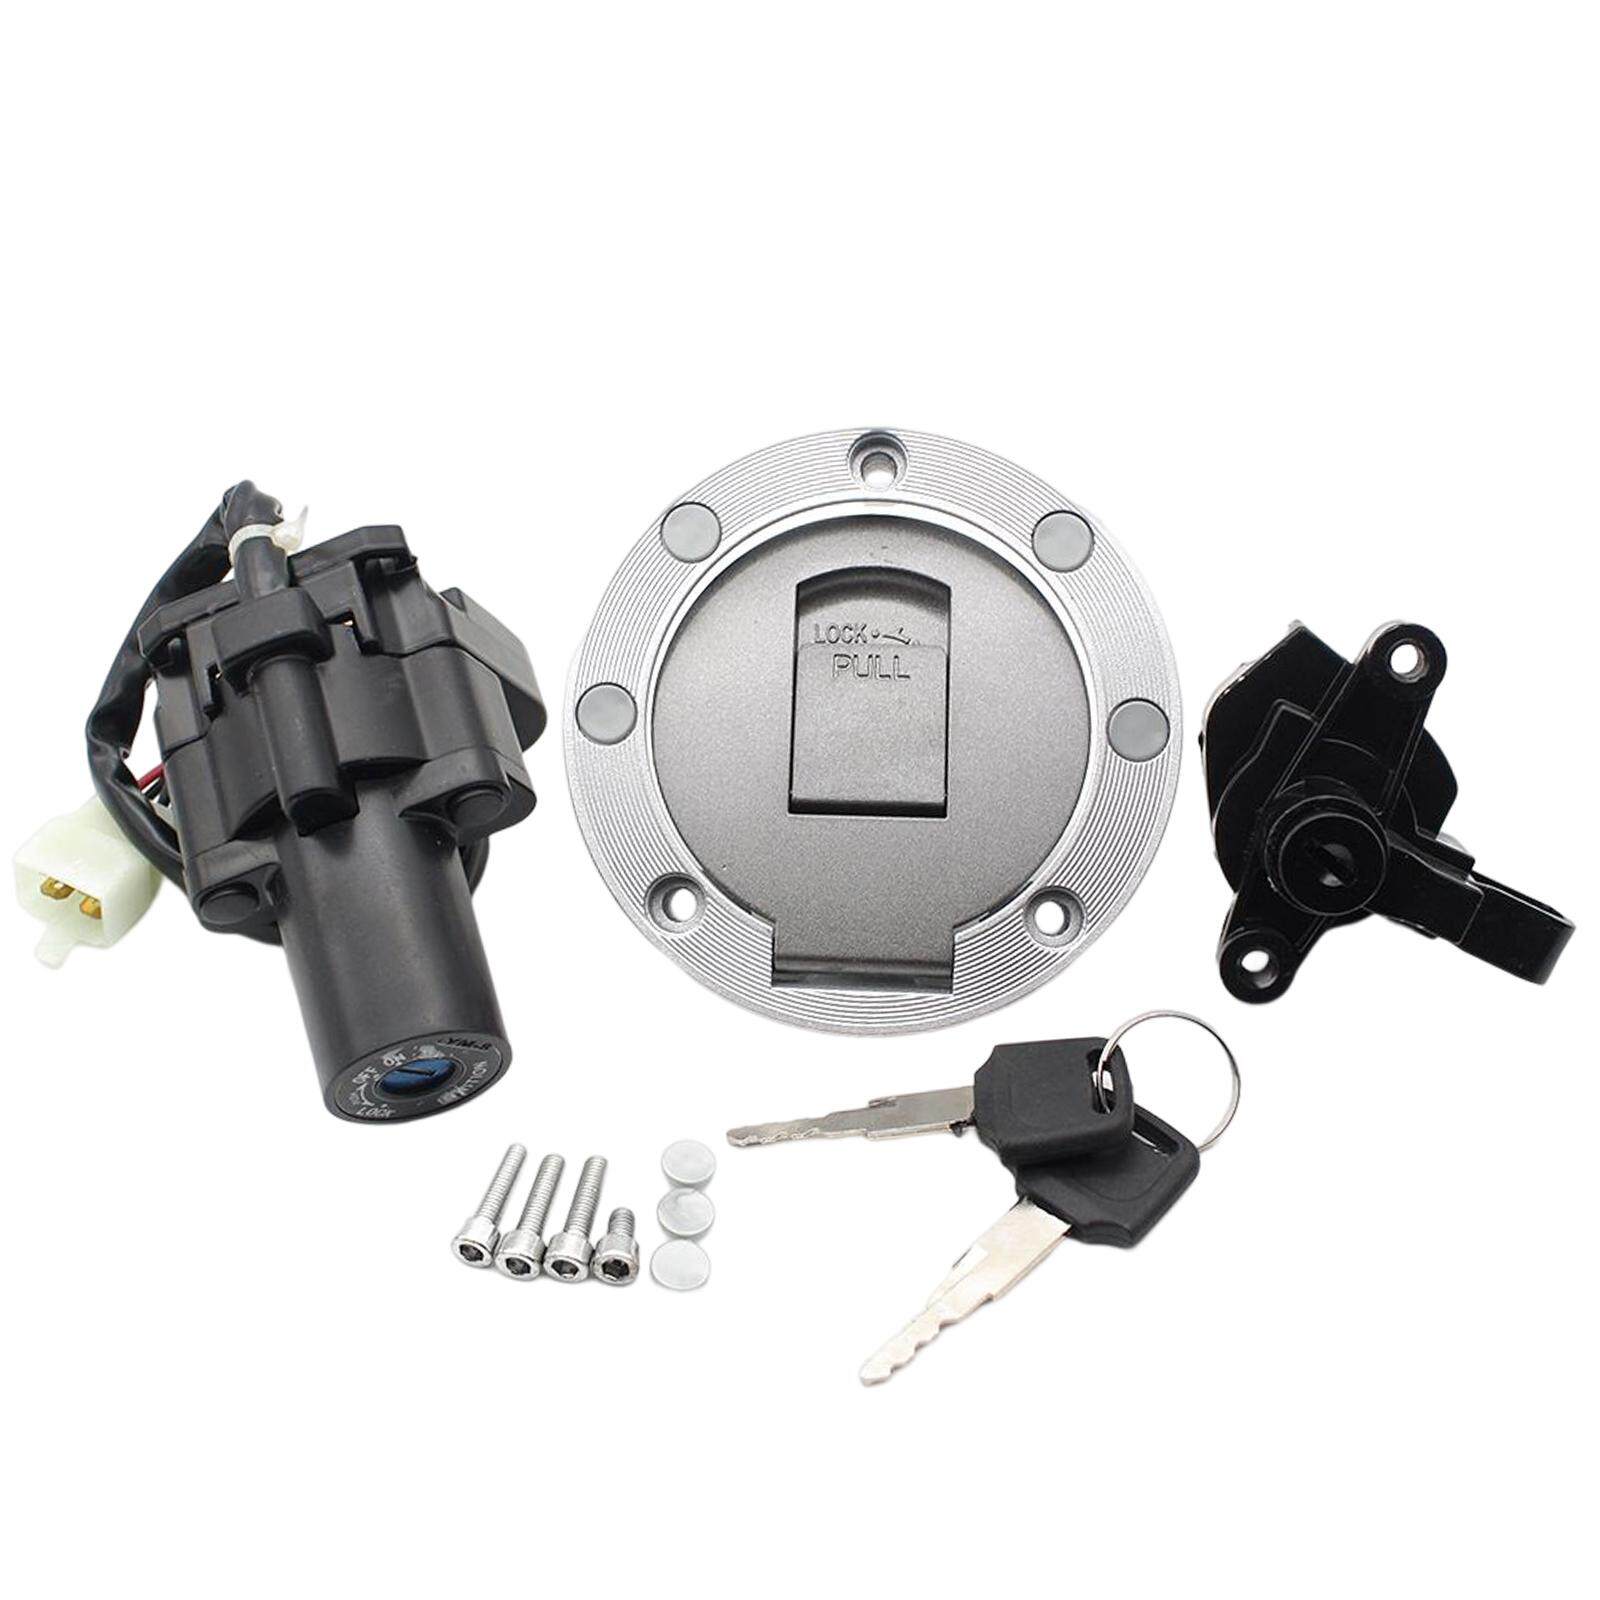 Sturdy Gas Fuel Tank Cap Cover with Keys for Yamaha XJR400 1993-2002 XJR1200 1994-1998 Assembly Parts Modification